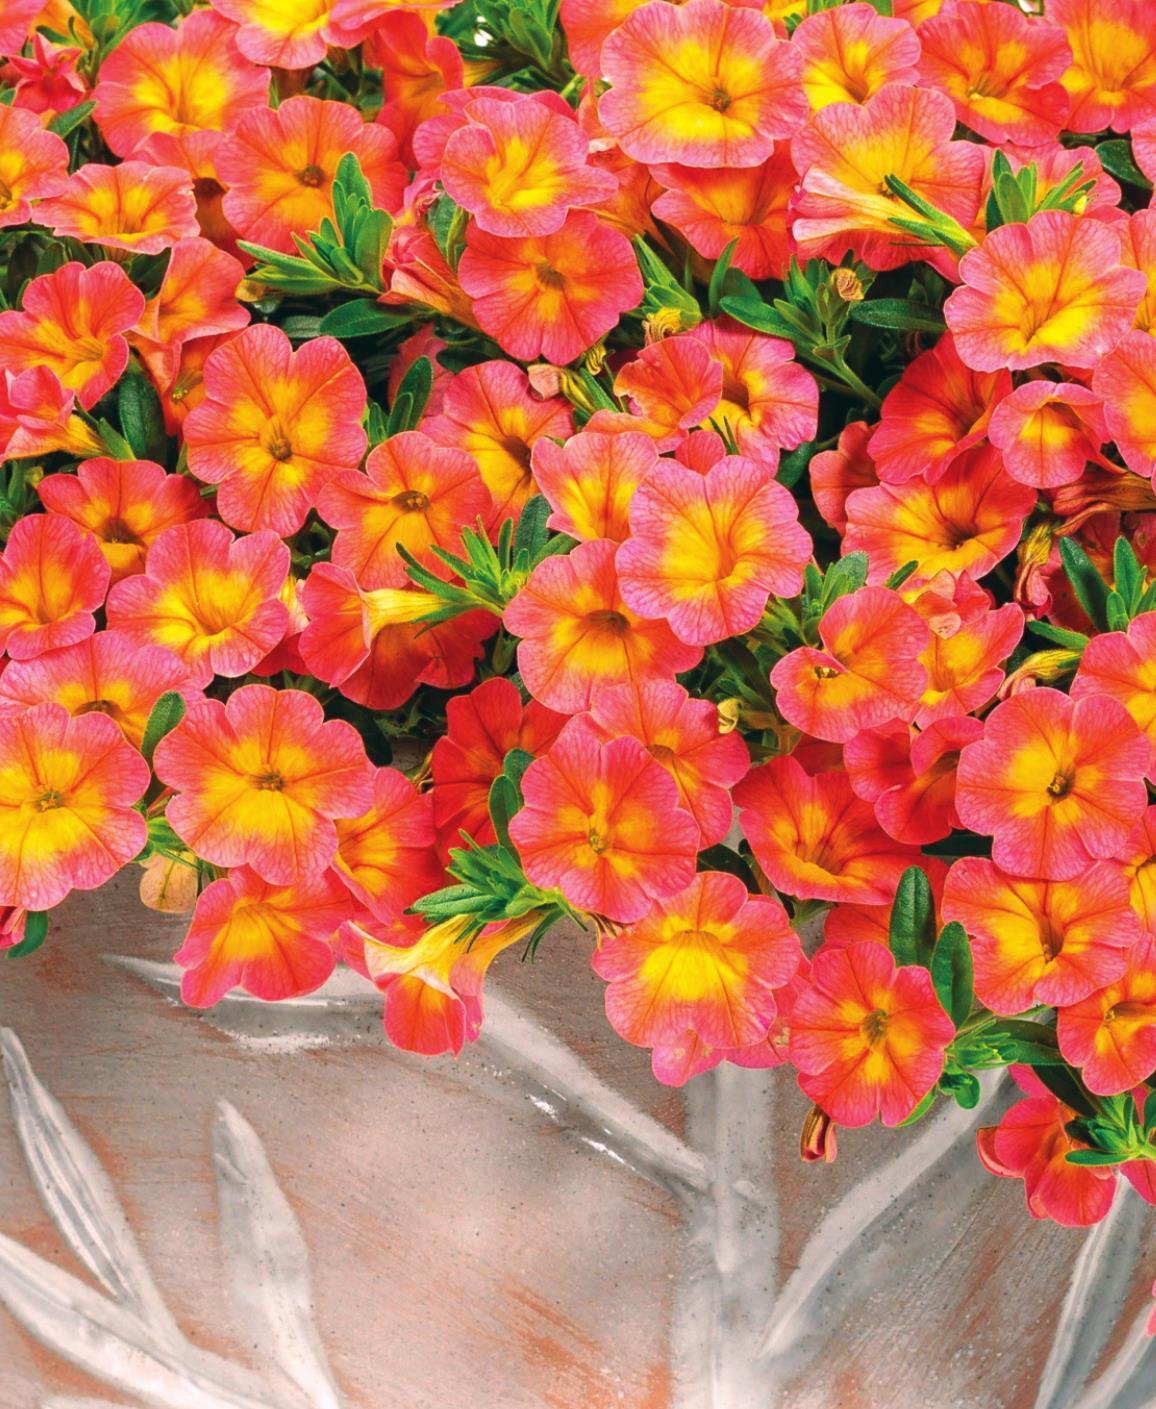 Superbells Coral Sun offers the garden flaming color